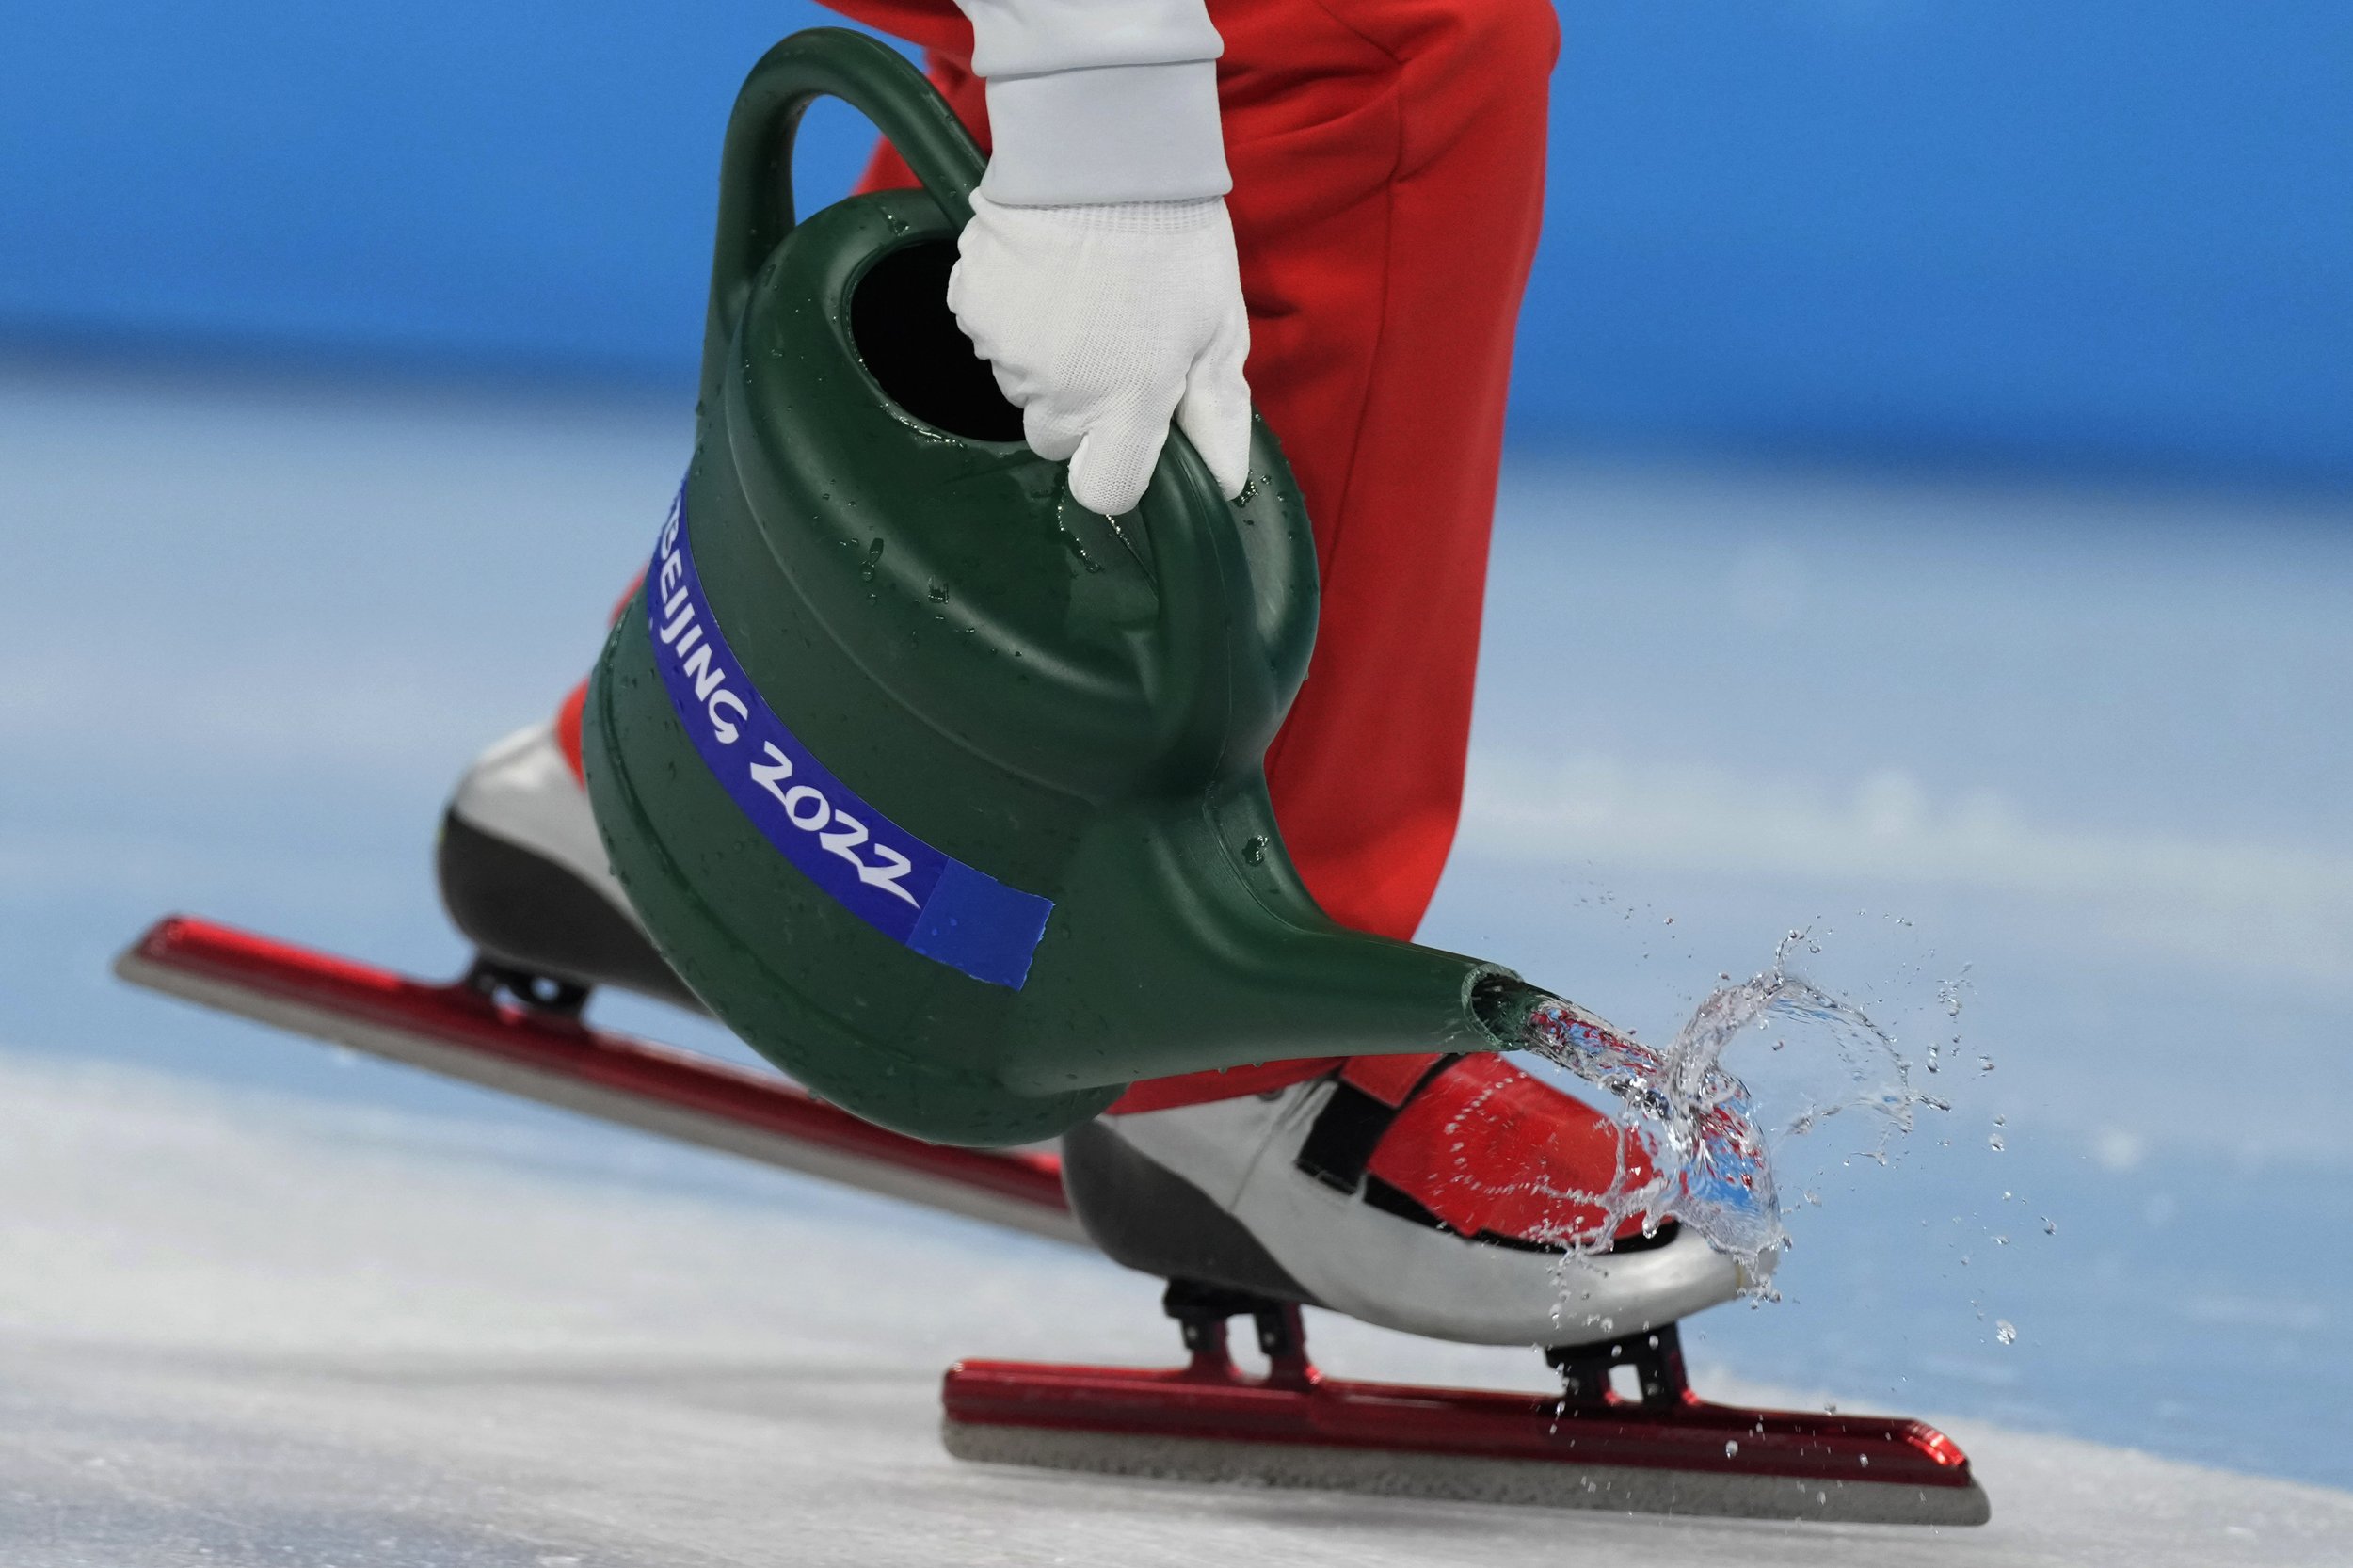  Track officials pour water on the track during the short track speedskating competition at the 2022 Winter Olympics, Wednesday, Feb. 9, 2022, in Beijing. (AP Photo/Natacha Pisarenko) 